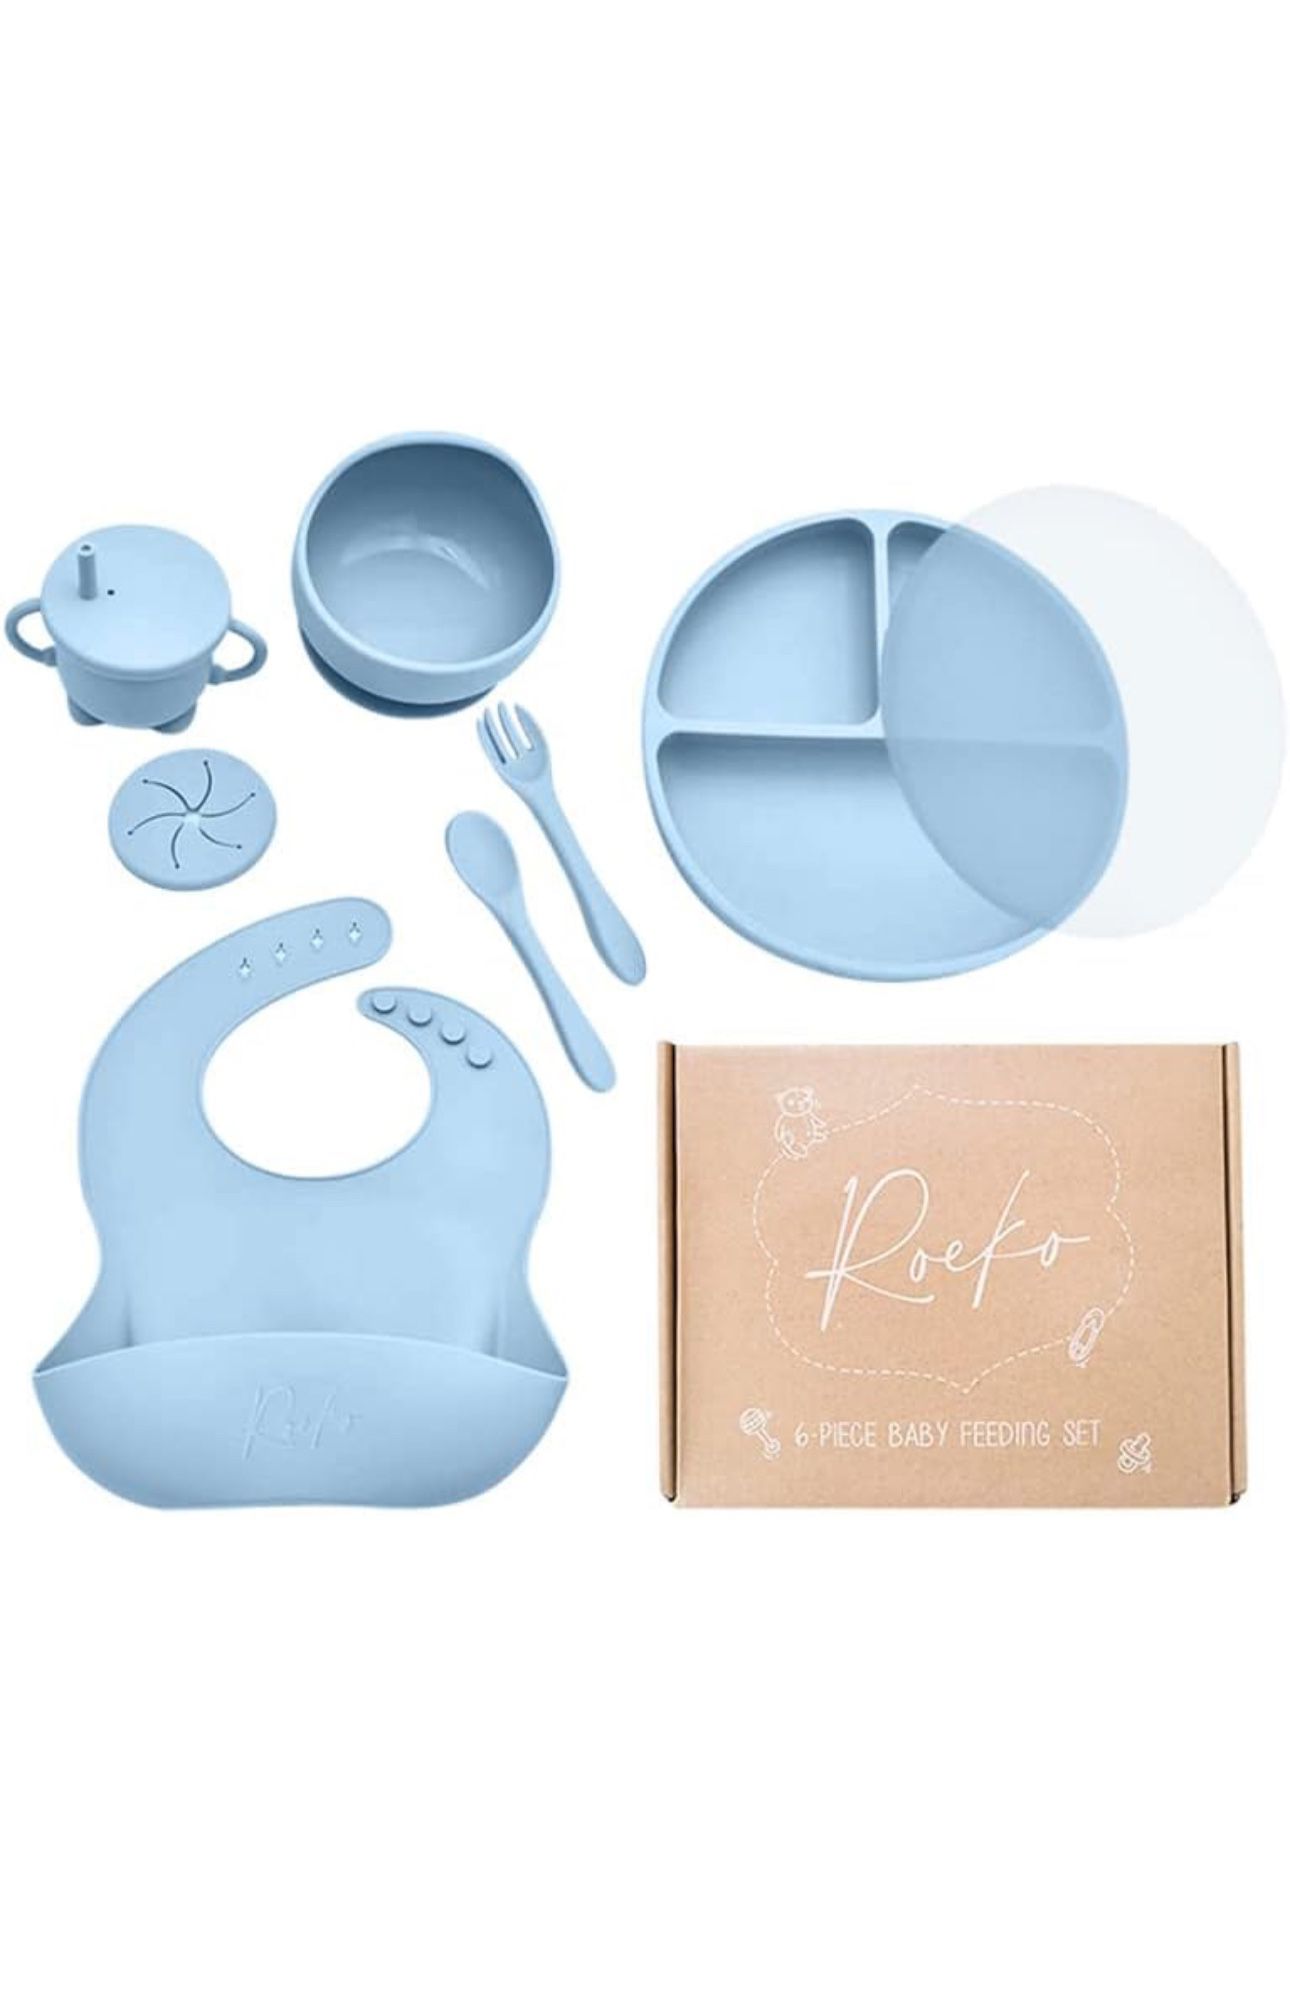 Baby Led Weaning Supplies - Silicone Baby Feeding Set - Baby Utensils - Silicone Plates For Baby - Suction Bowls for Baby- Adjustable Bibs - Baby Feed